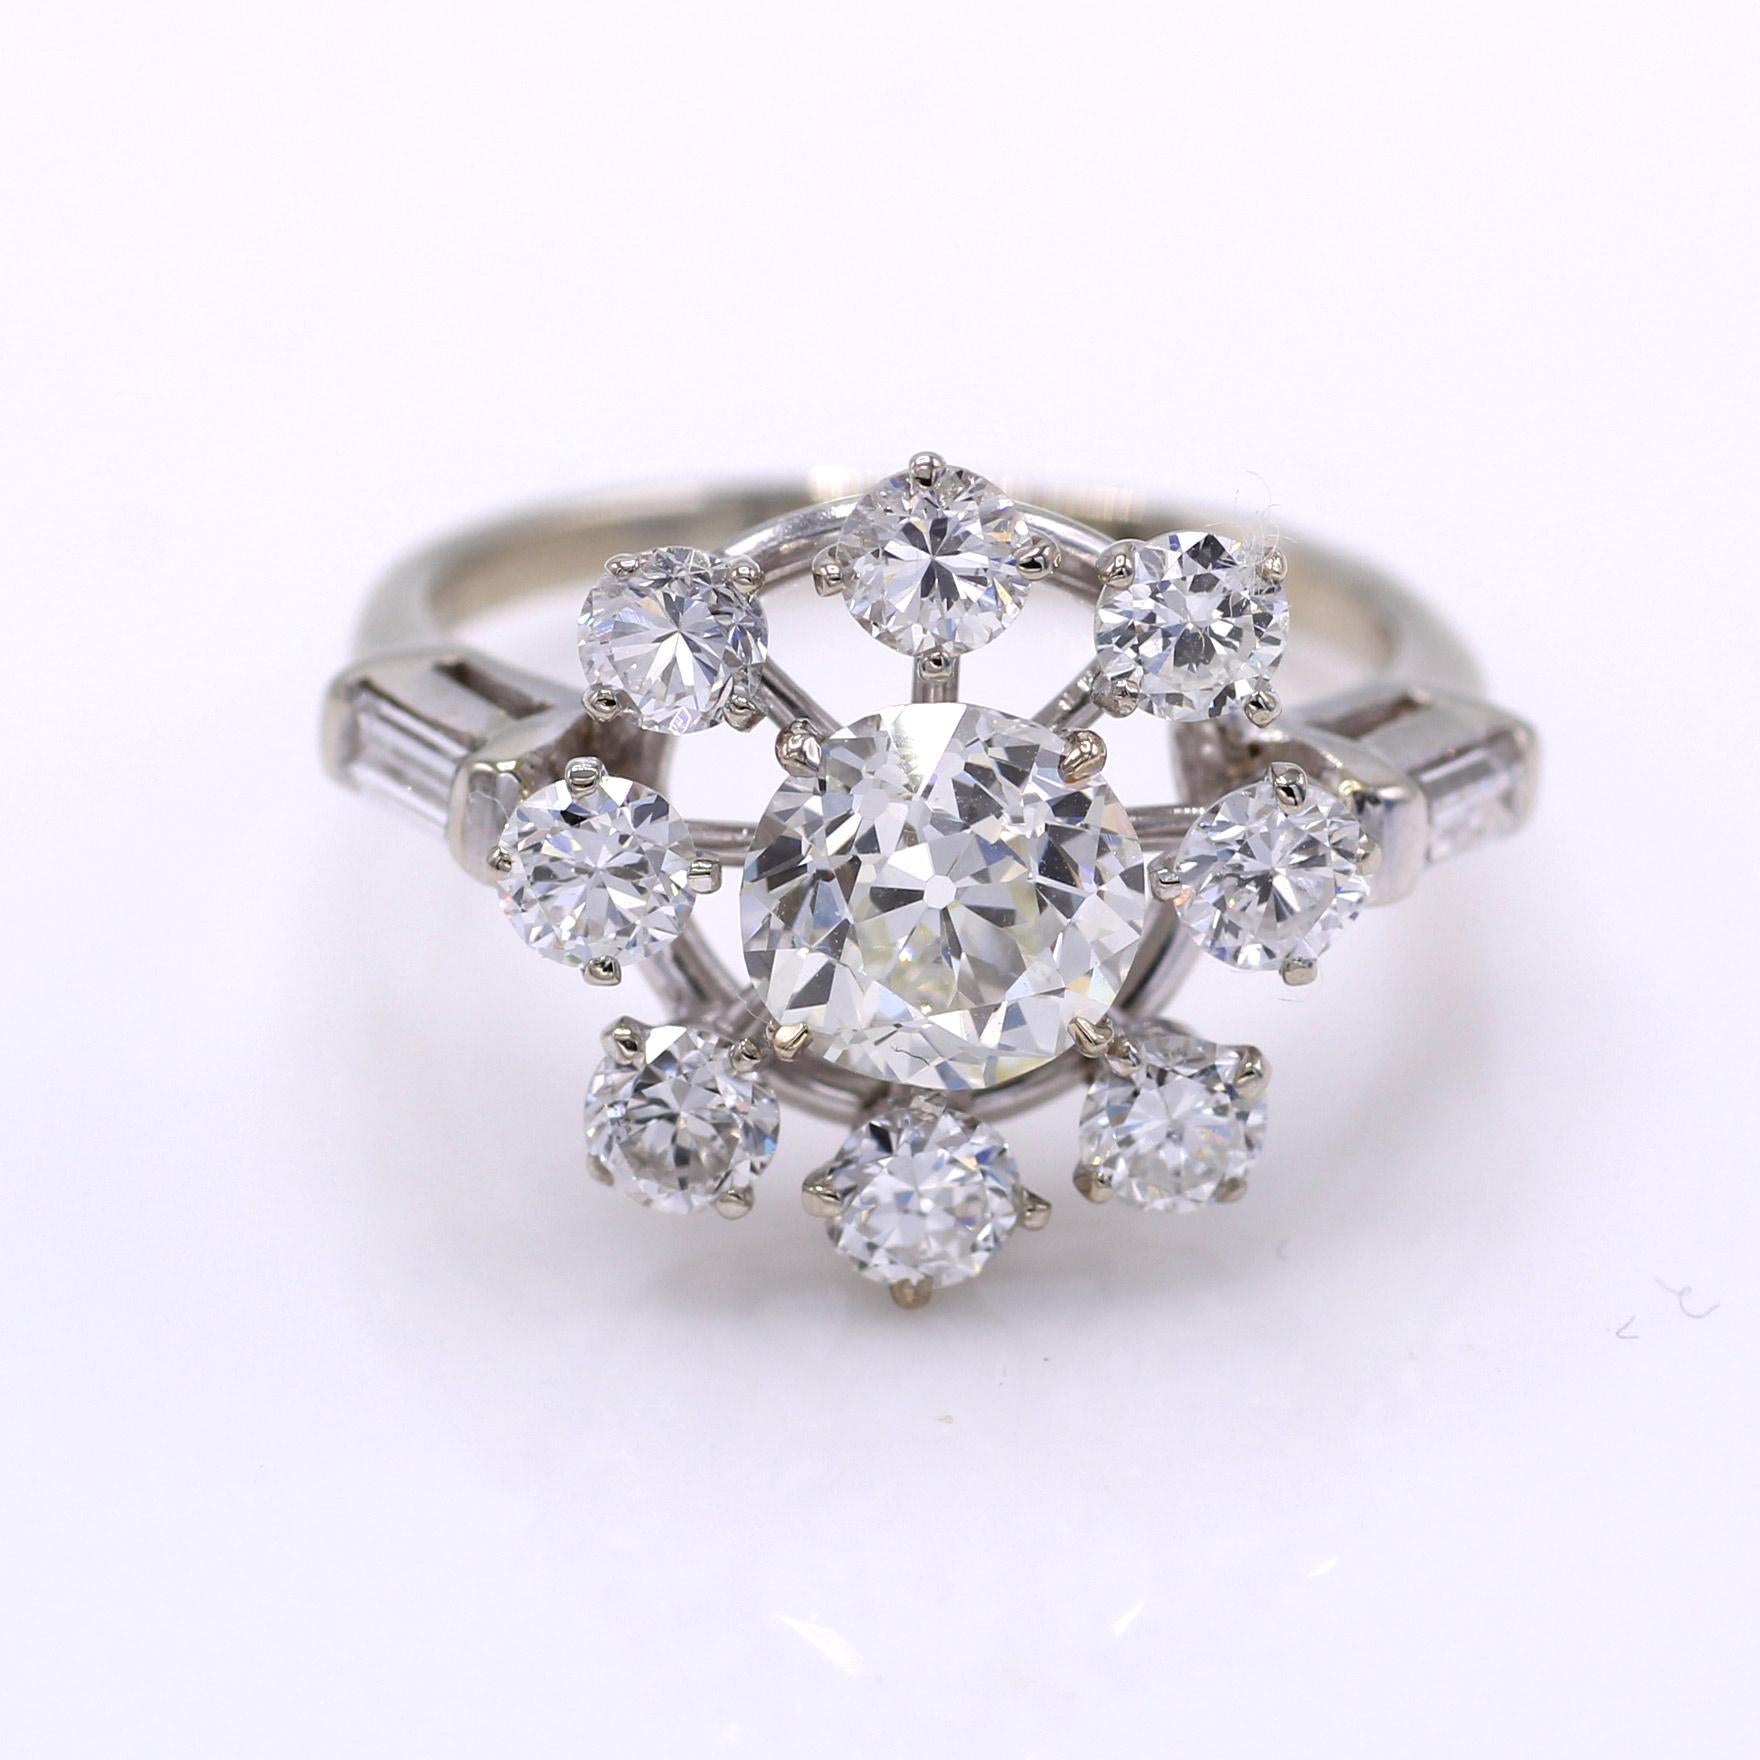 Centrally set in platinum this ring features a beautiful Old European Cut diamond weighing 1.42 carats accompanied by a report from the GIA with a color grade of I and a clarity of VS 1. Surrounded by 8 perfectly matched bright white Old European